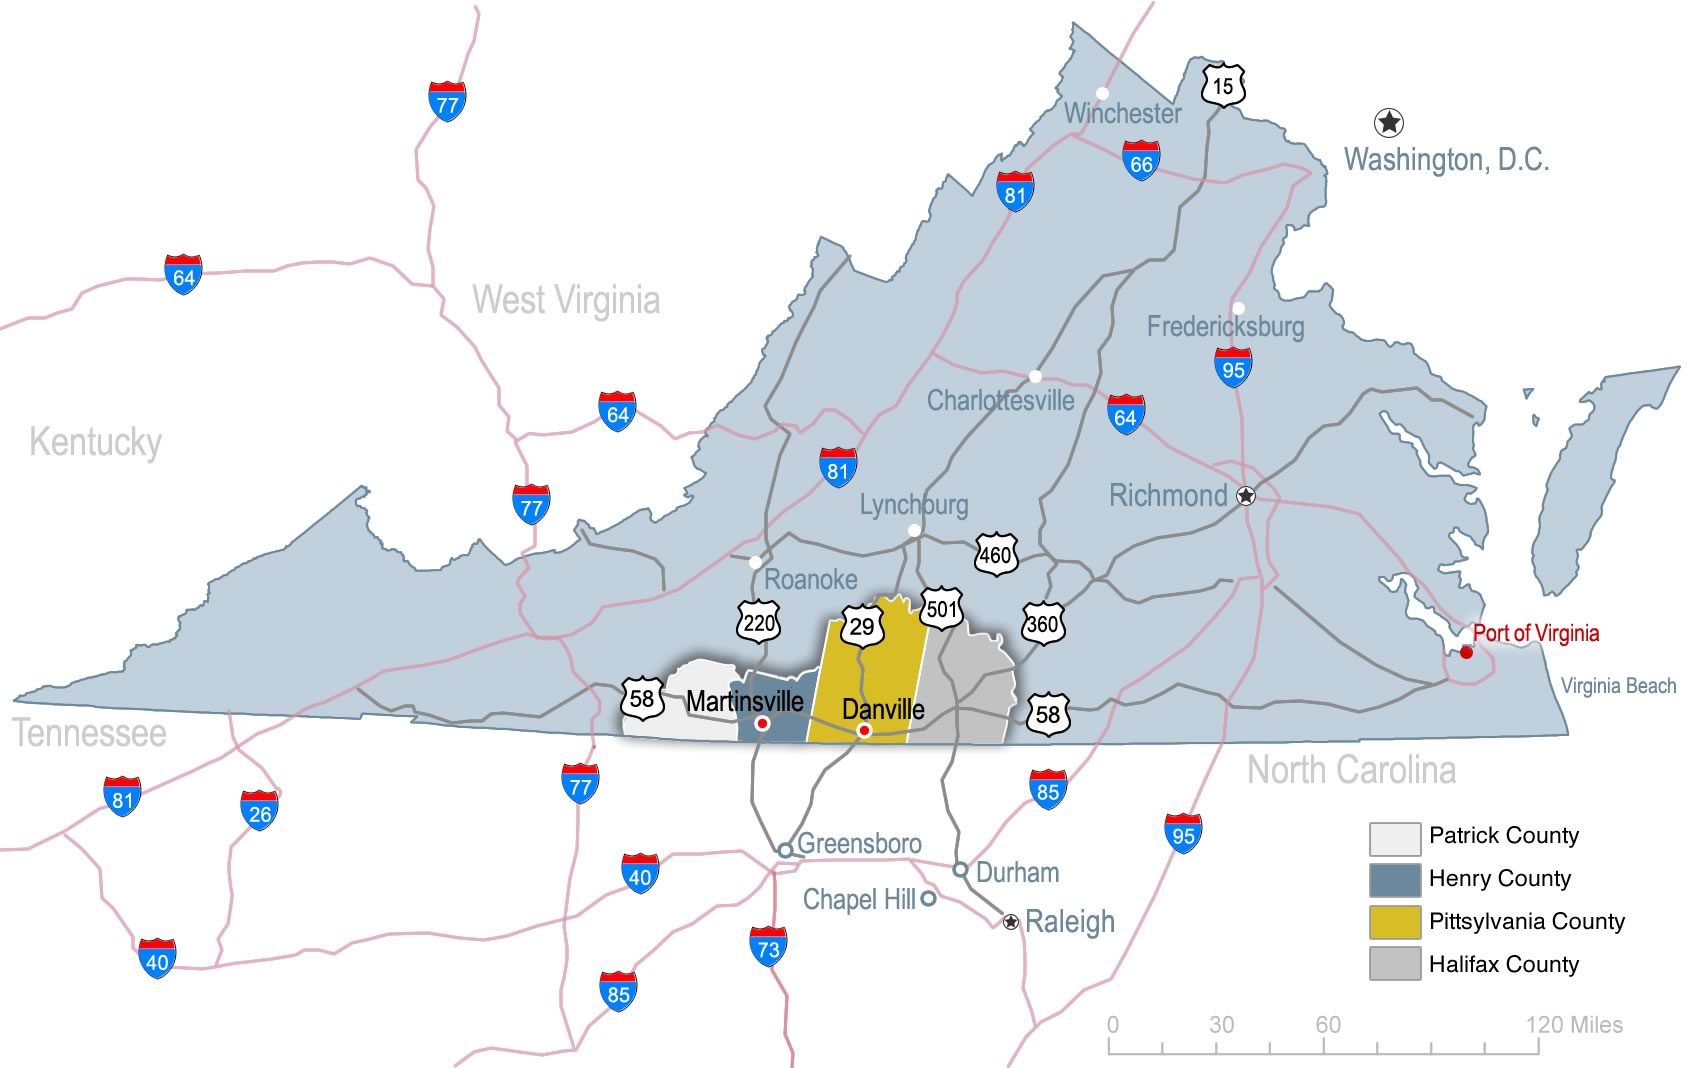 Southern Virginia major highways and interstates